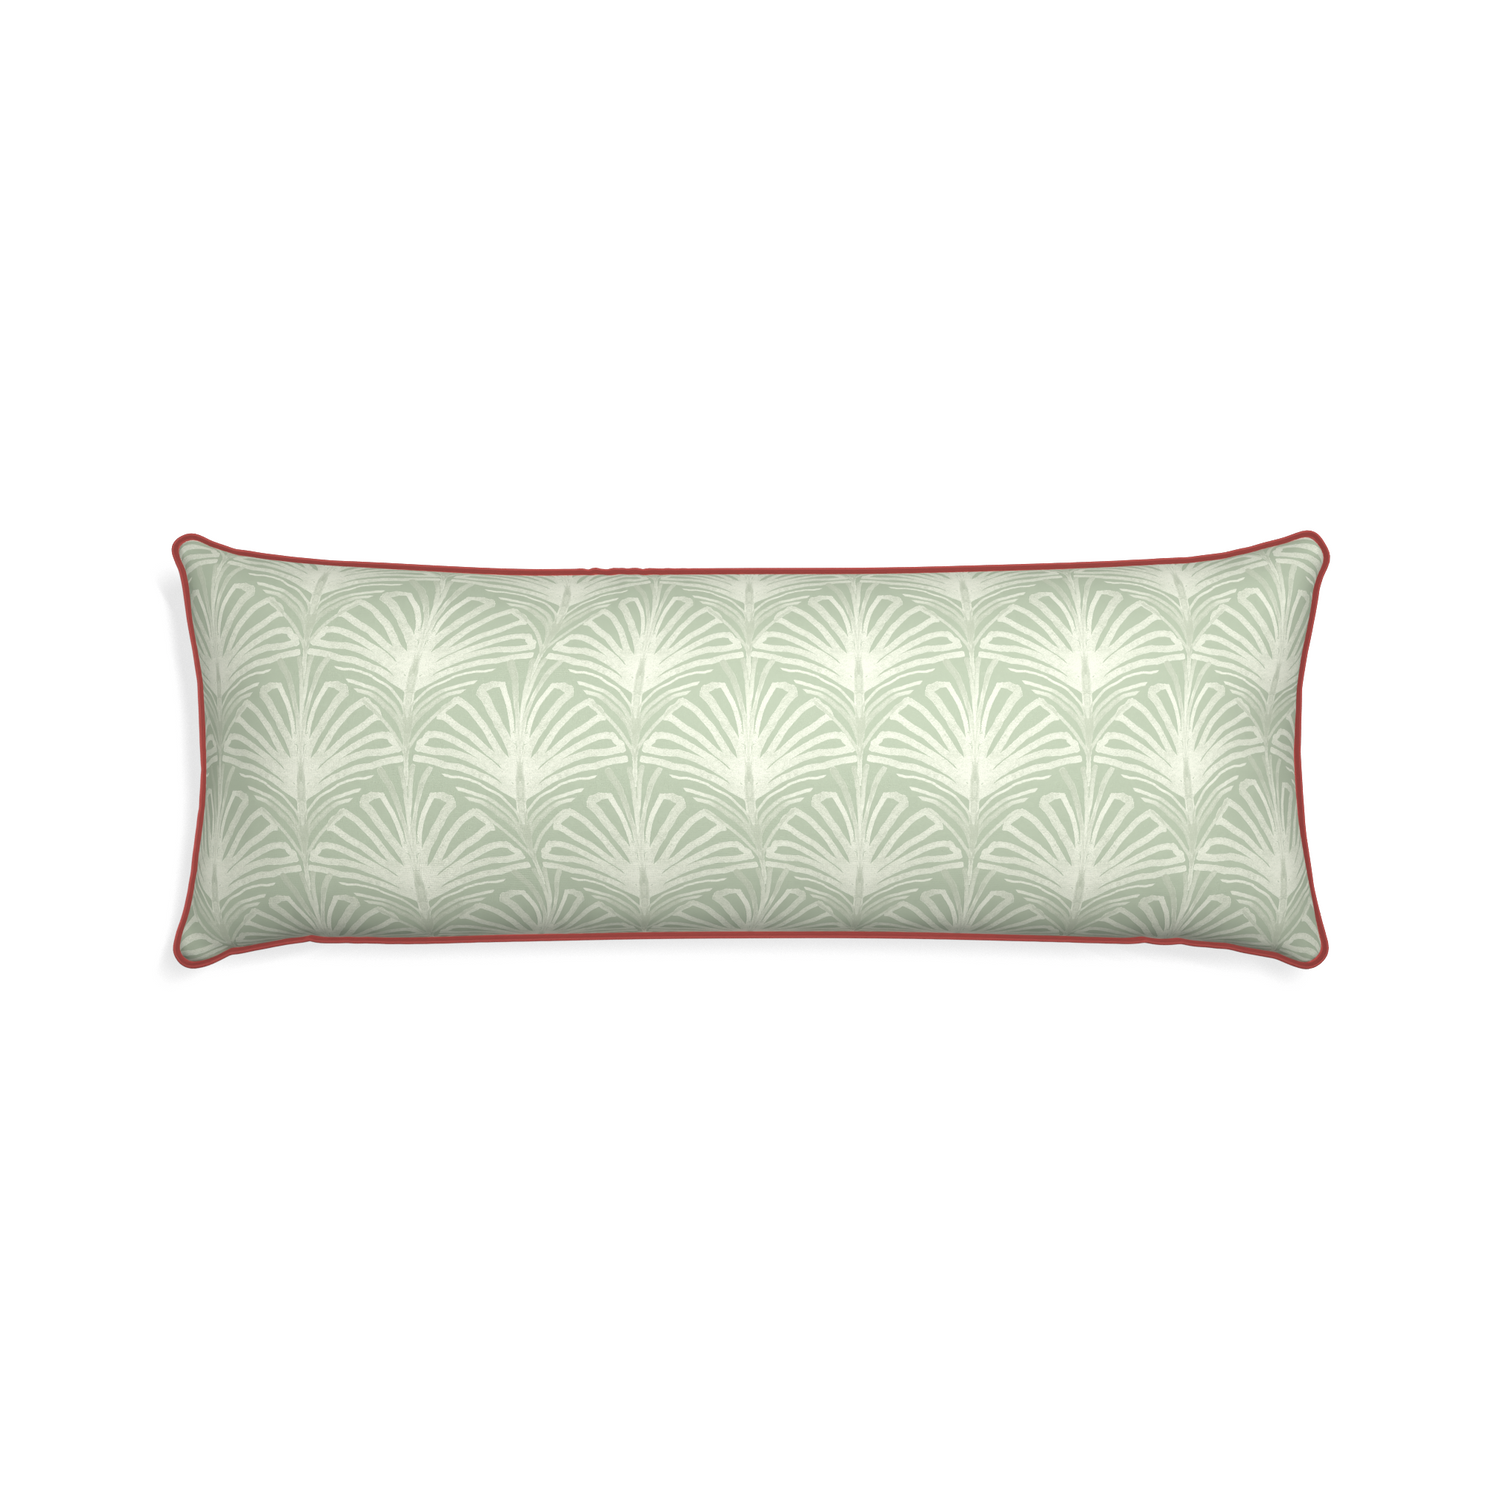 Xl-lumbar suzy sage custom pillow with c piping on white background